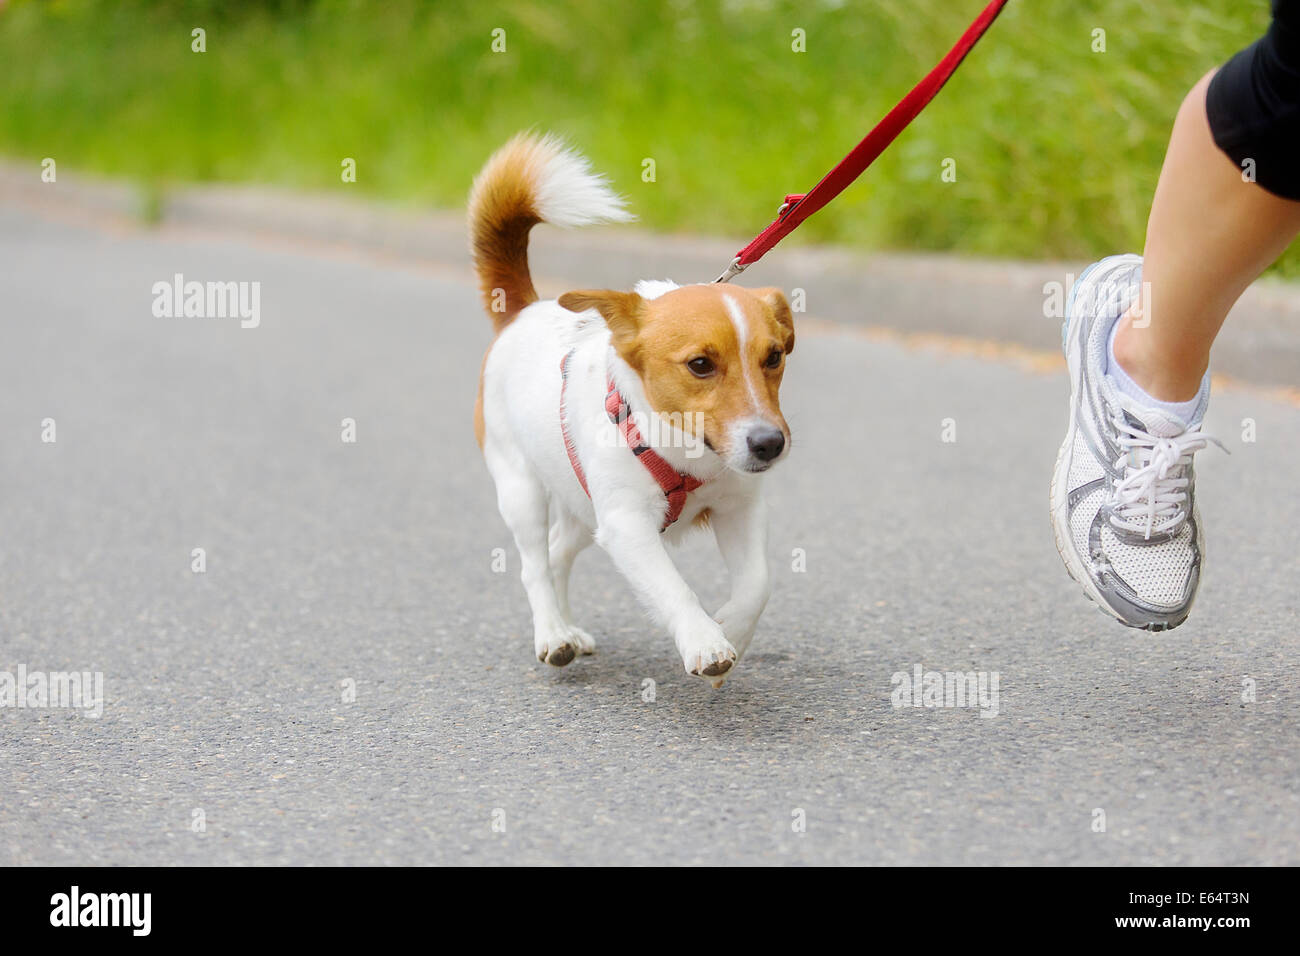 Dog and his owner are running together at a running event Stock Photo